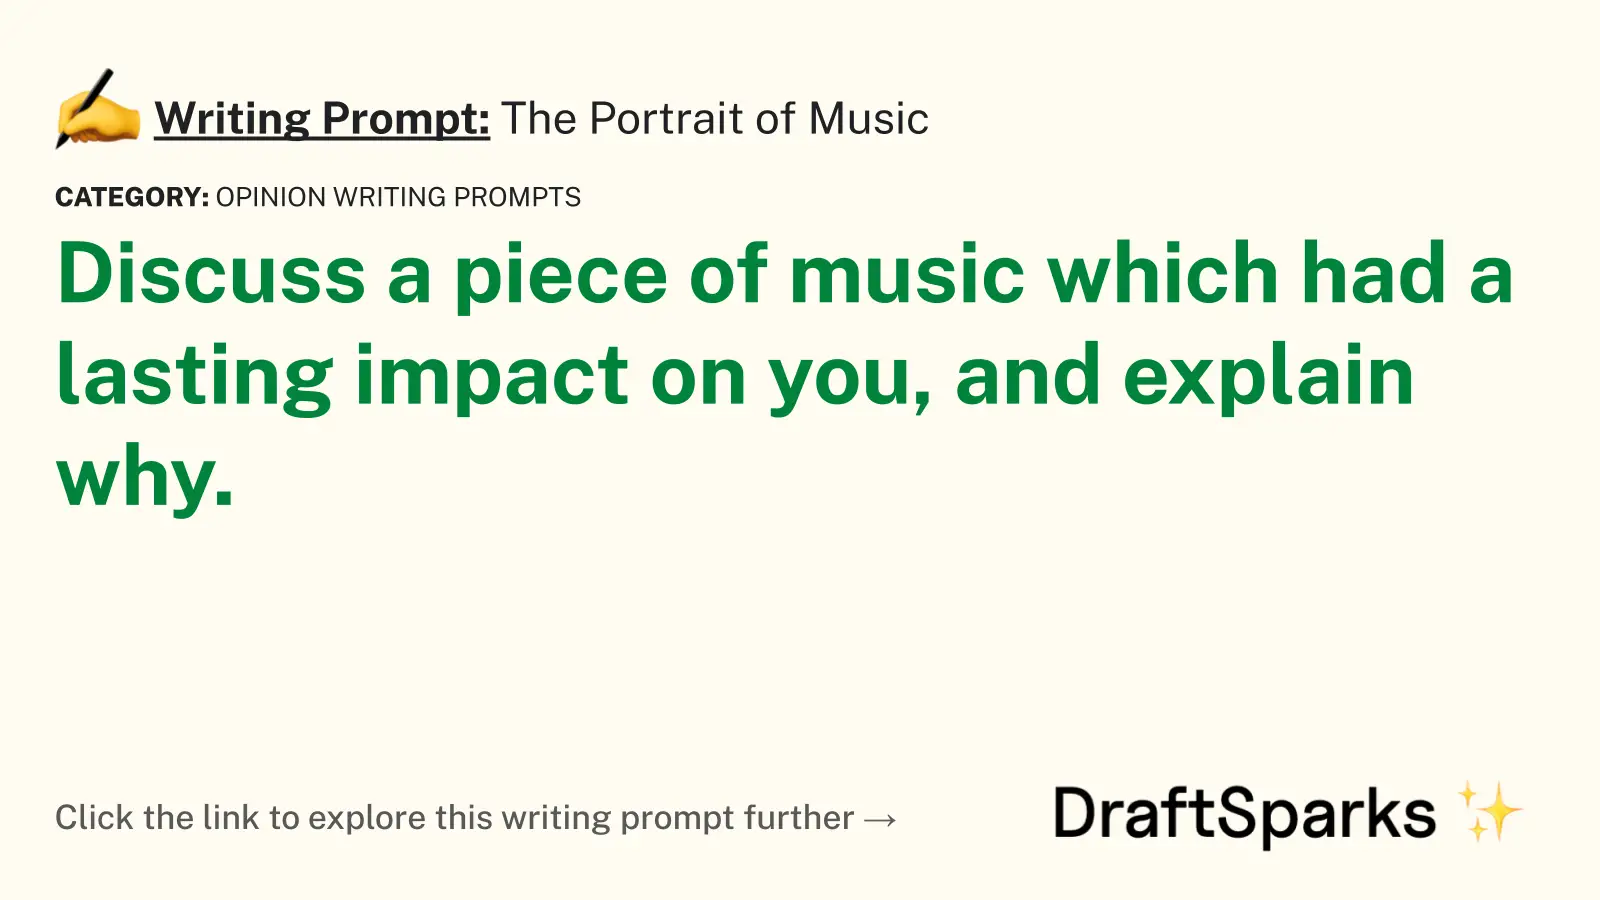 The Portrait of Music